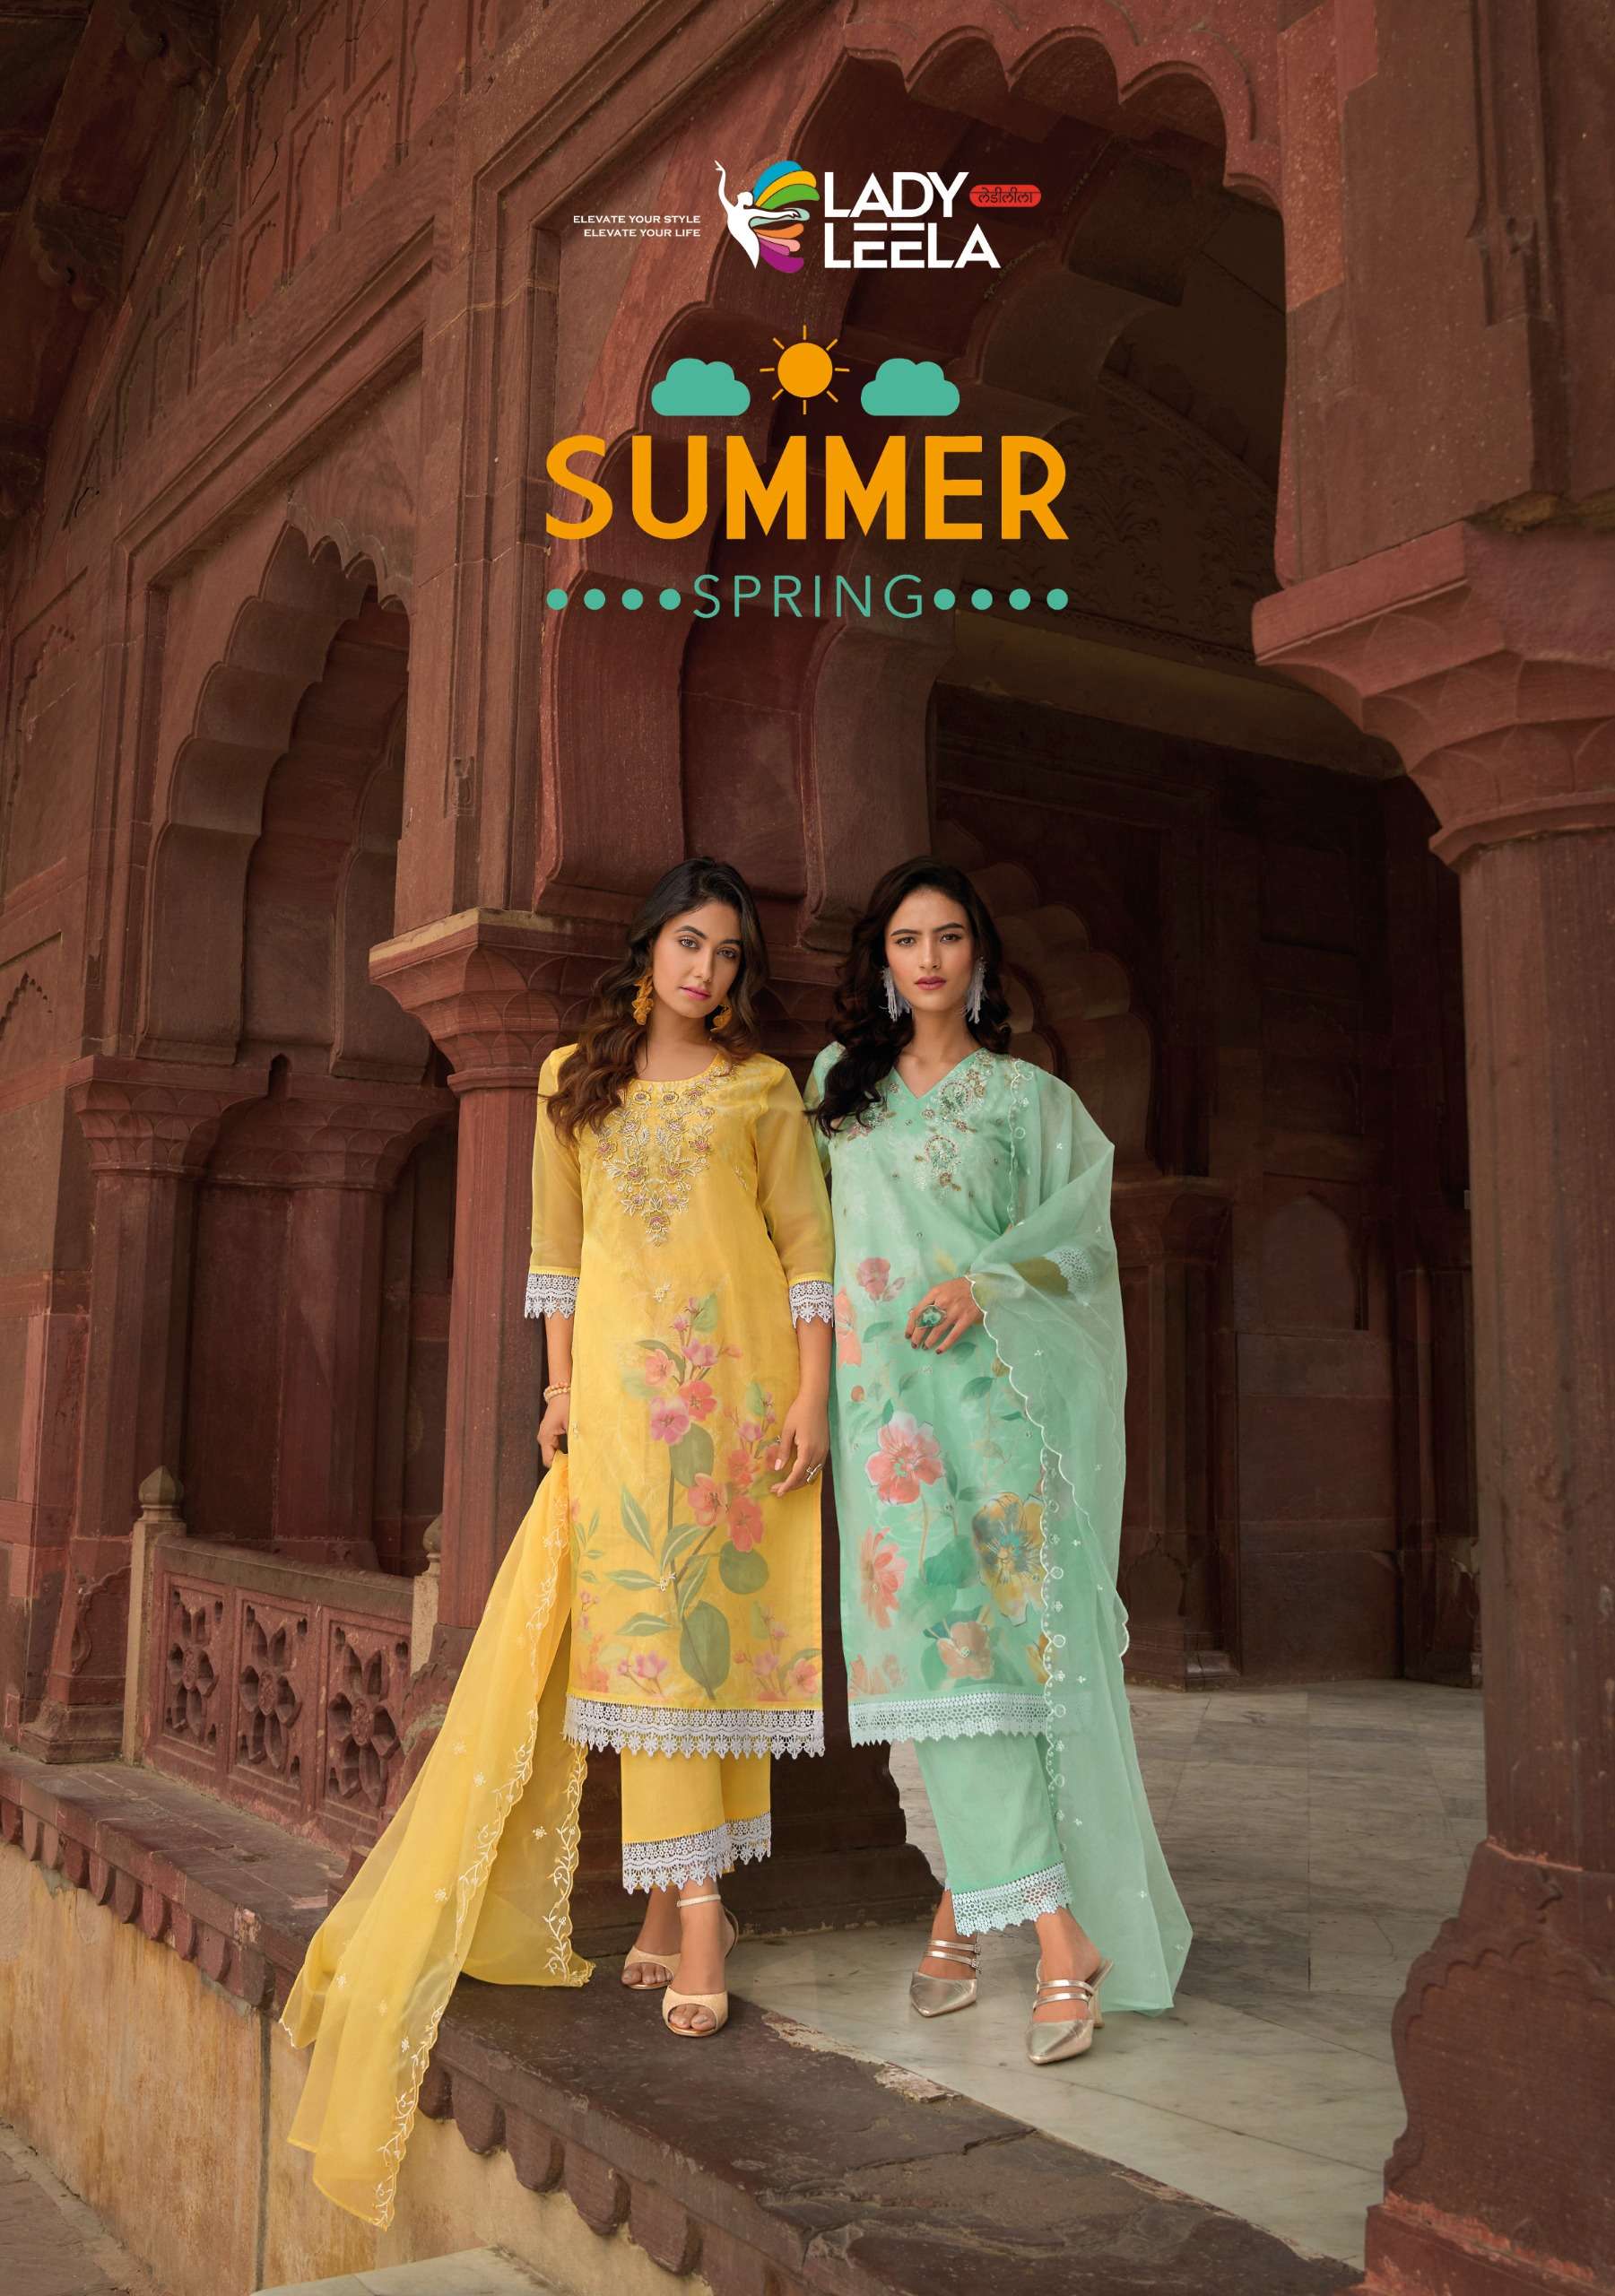 SUMMER SPRING ORGANZA EMBRIODARY AND HANDWORK KURTI WITH CAMBRIC PANT AND DUPATTA BY LADY LEELA BRAN...